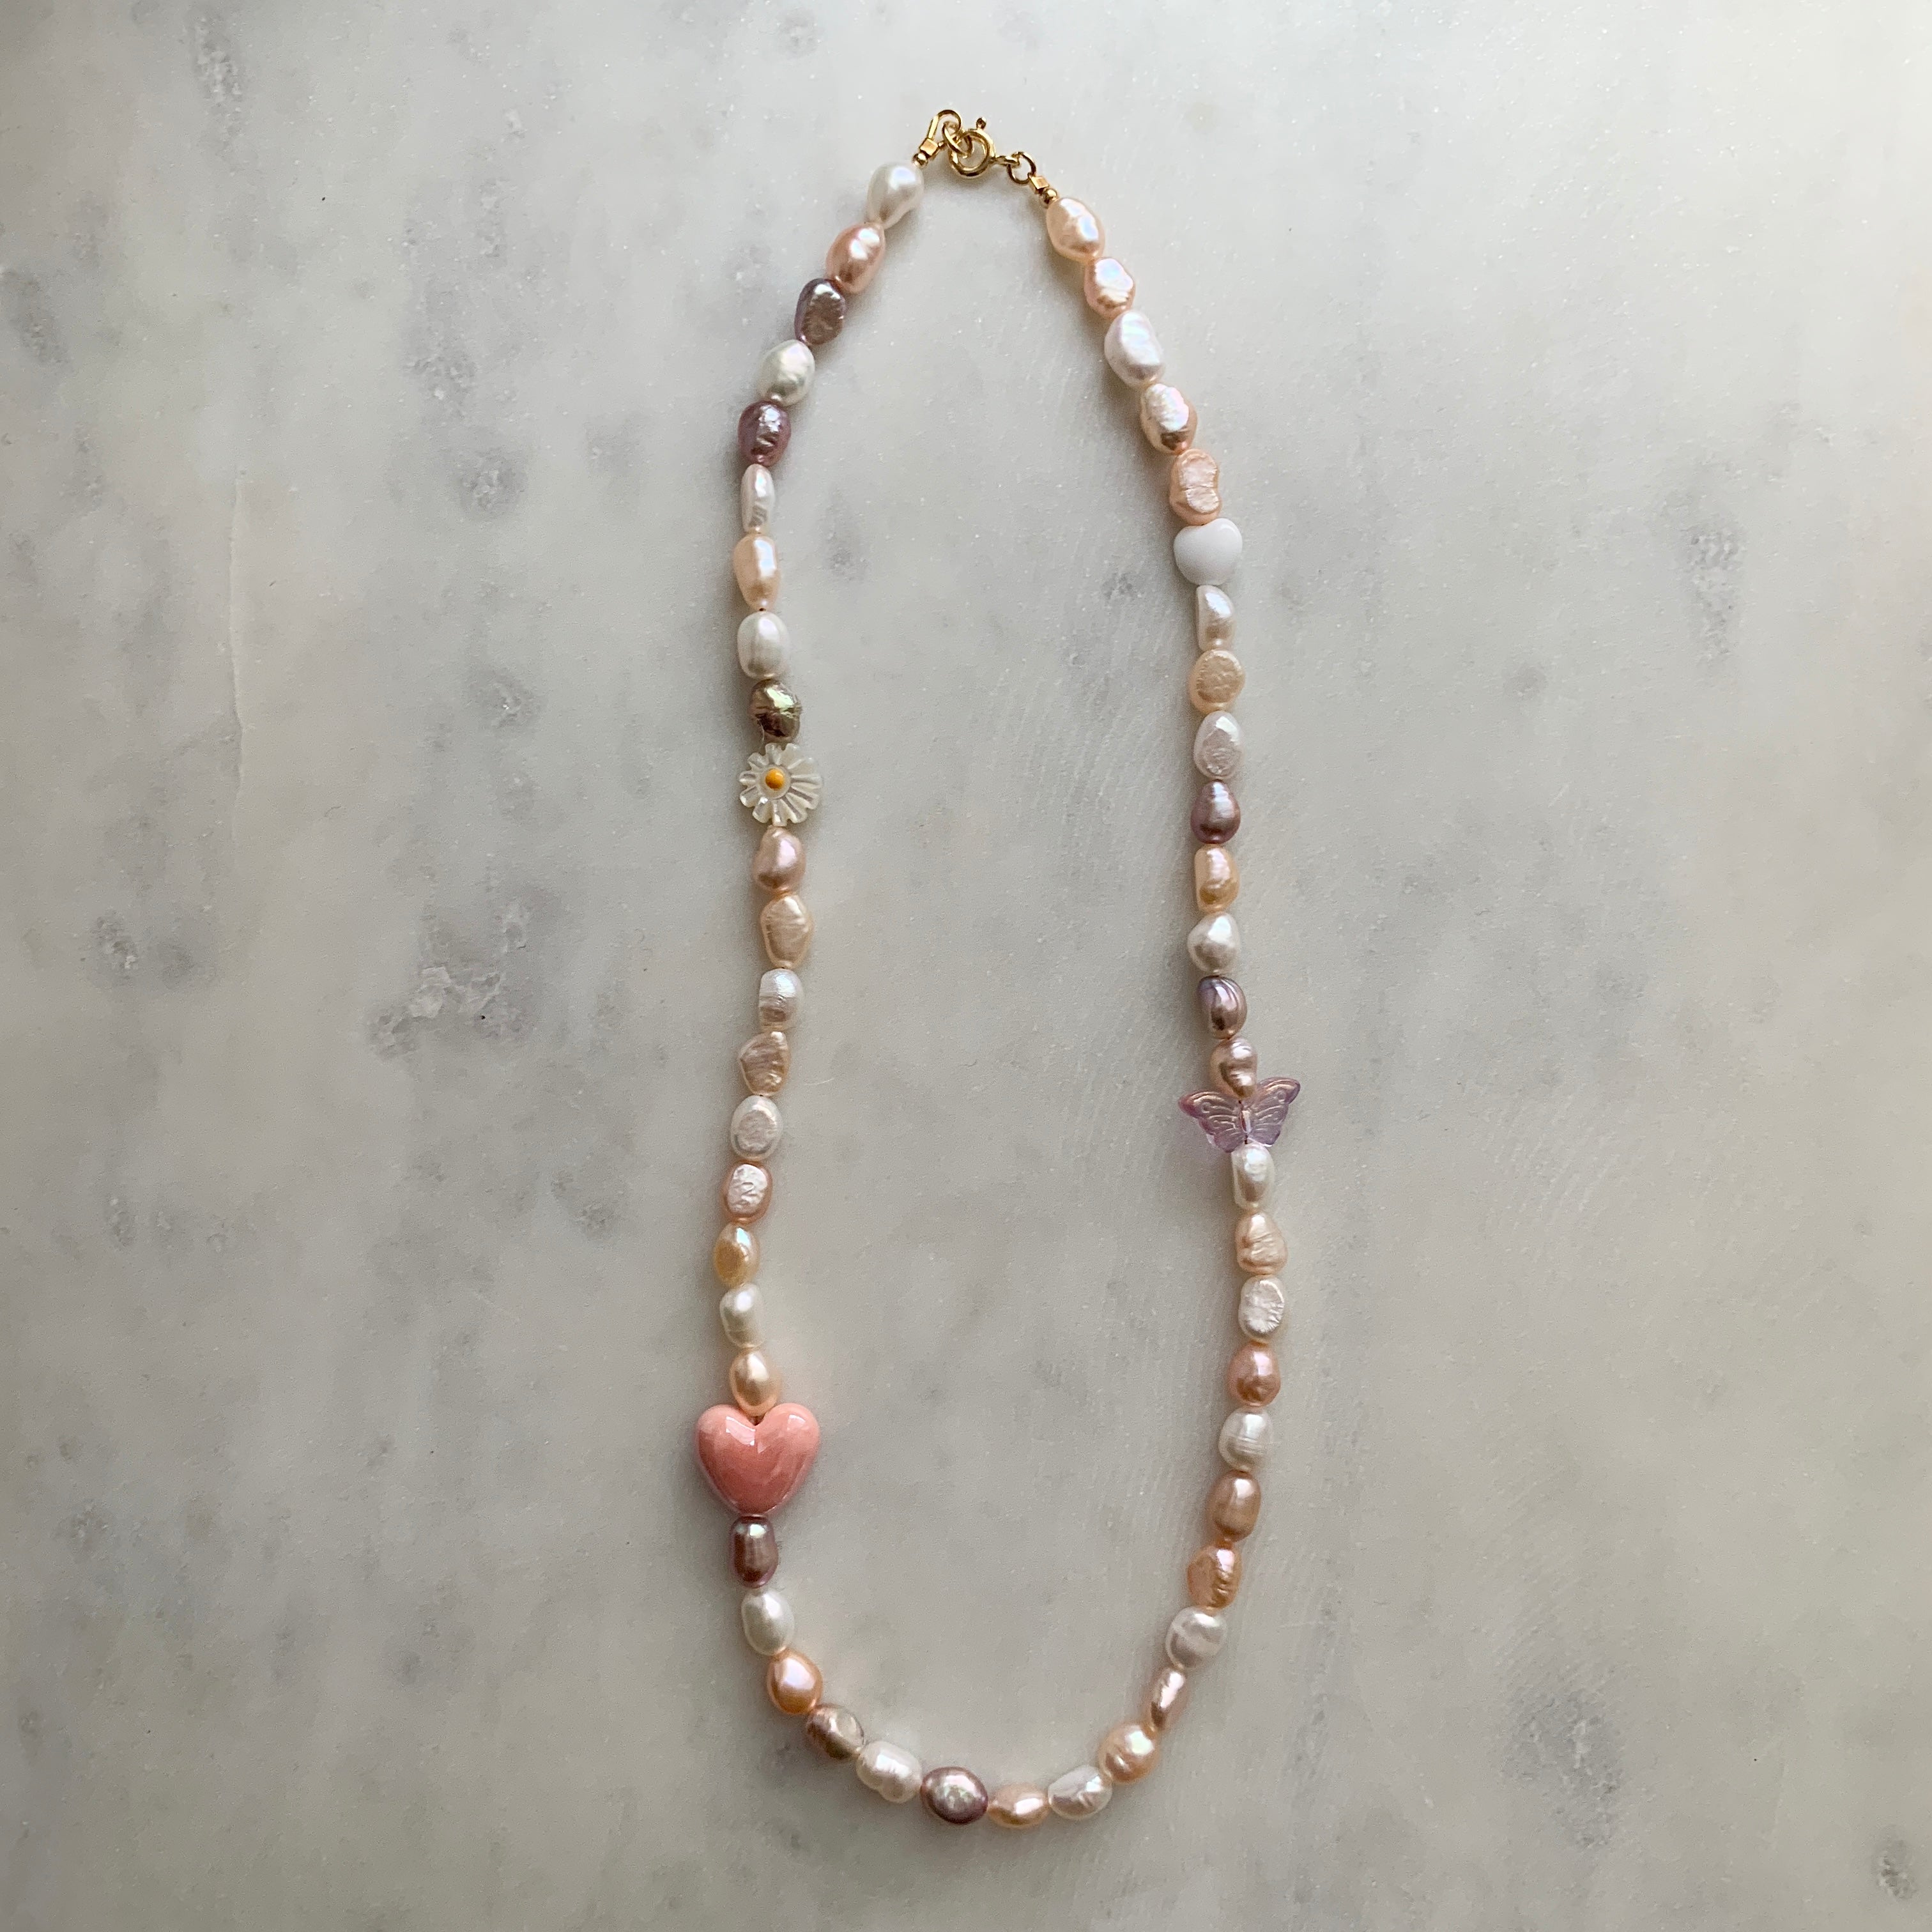 A Hint of Spring Necklace